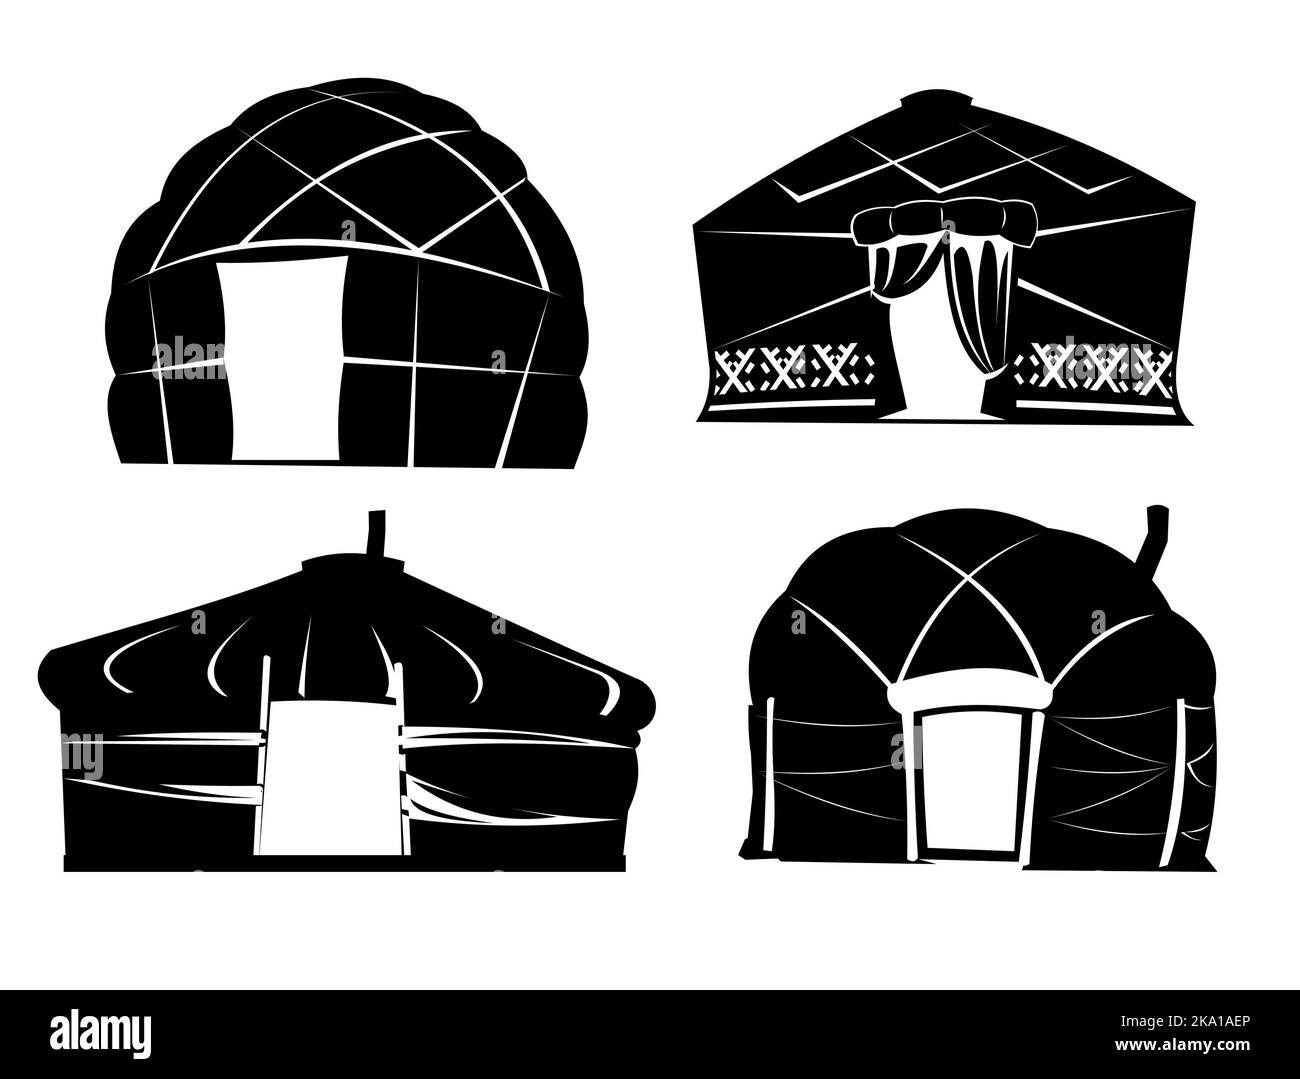 Set of Yurt in tundra. Silhouette design. Dwelling of northern nomadic peoples in Arctic. From felt and skins. Isolated on white background. Illustrat Stock Vector